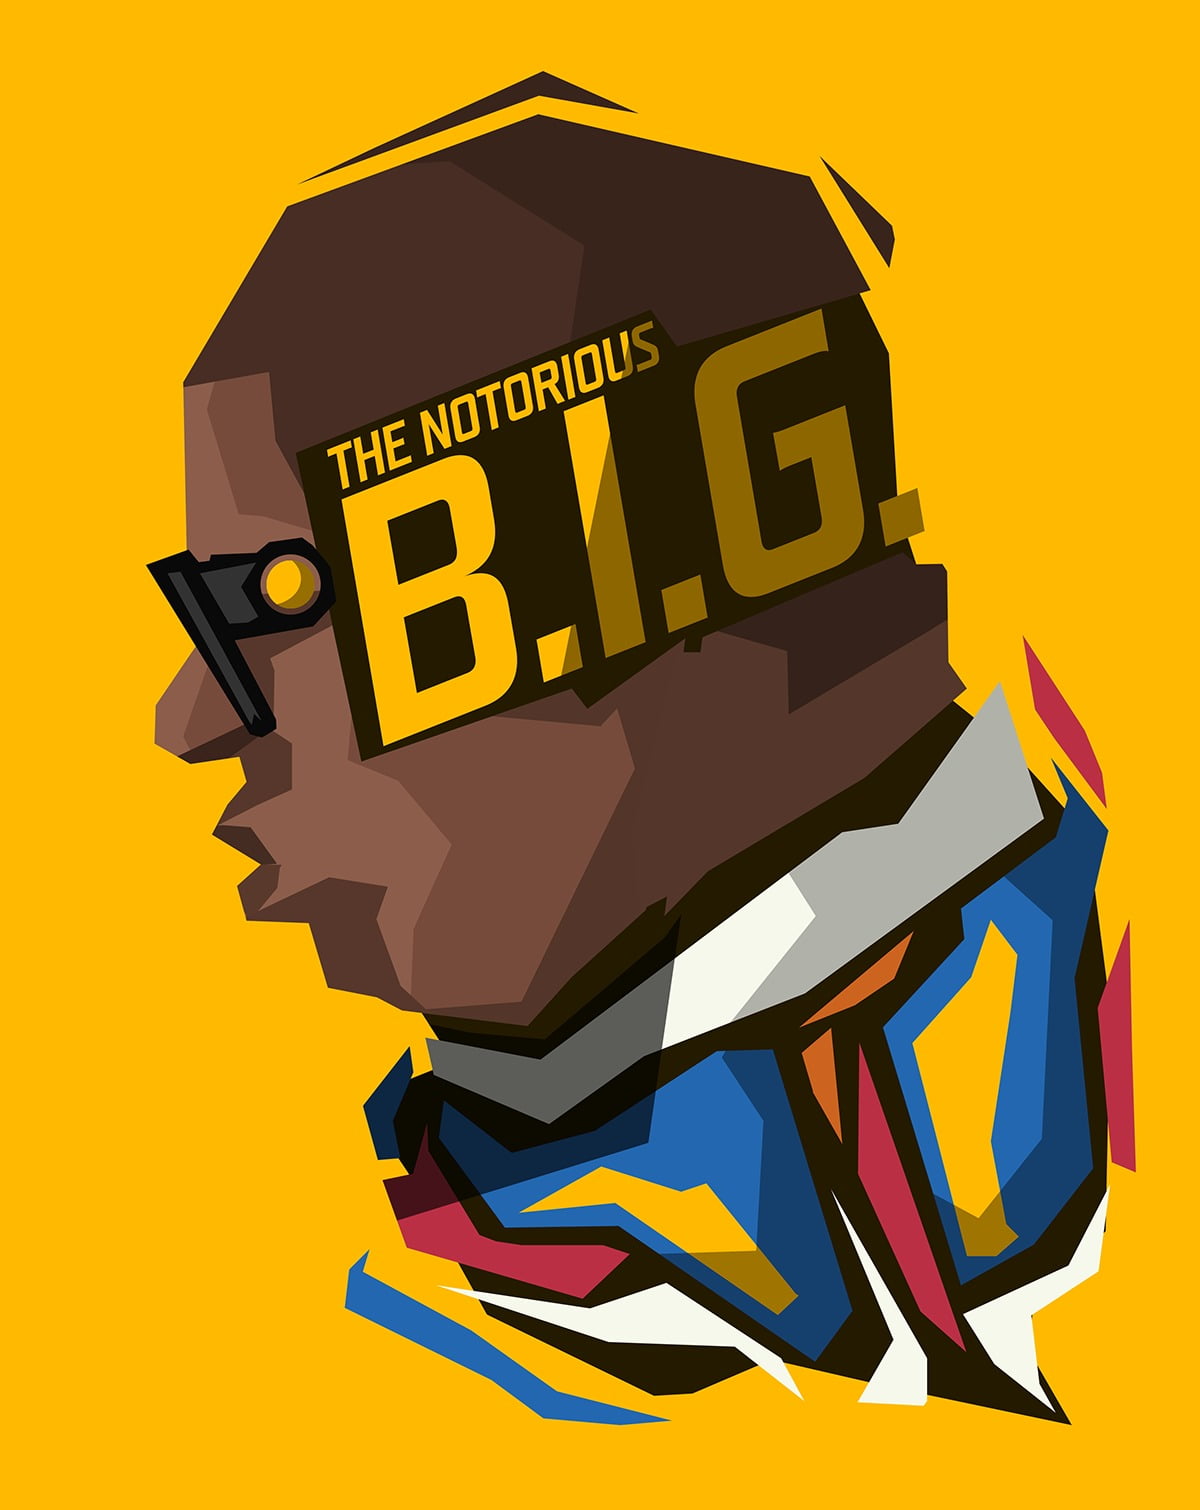 The Notorious B.I.G. illustration, yellow background, Rapper